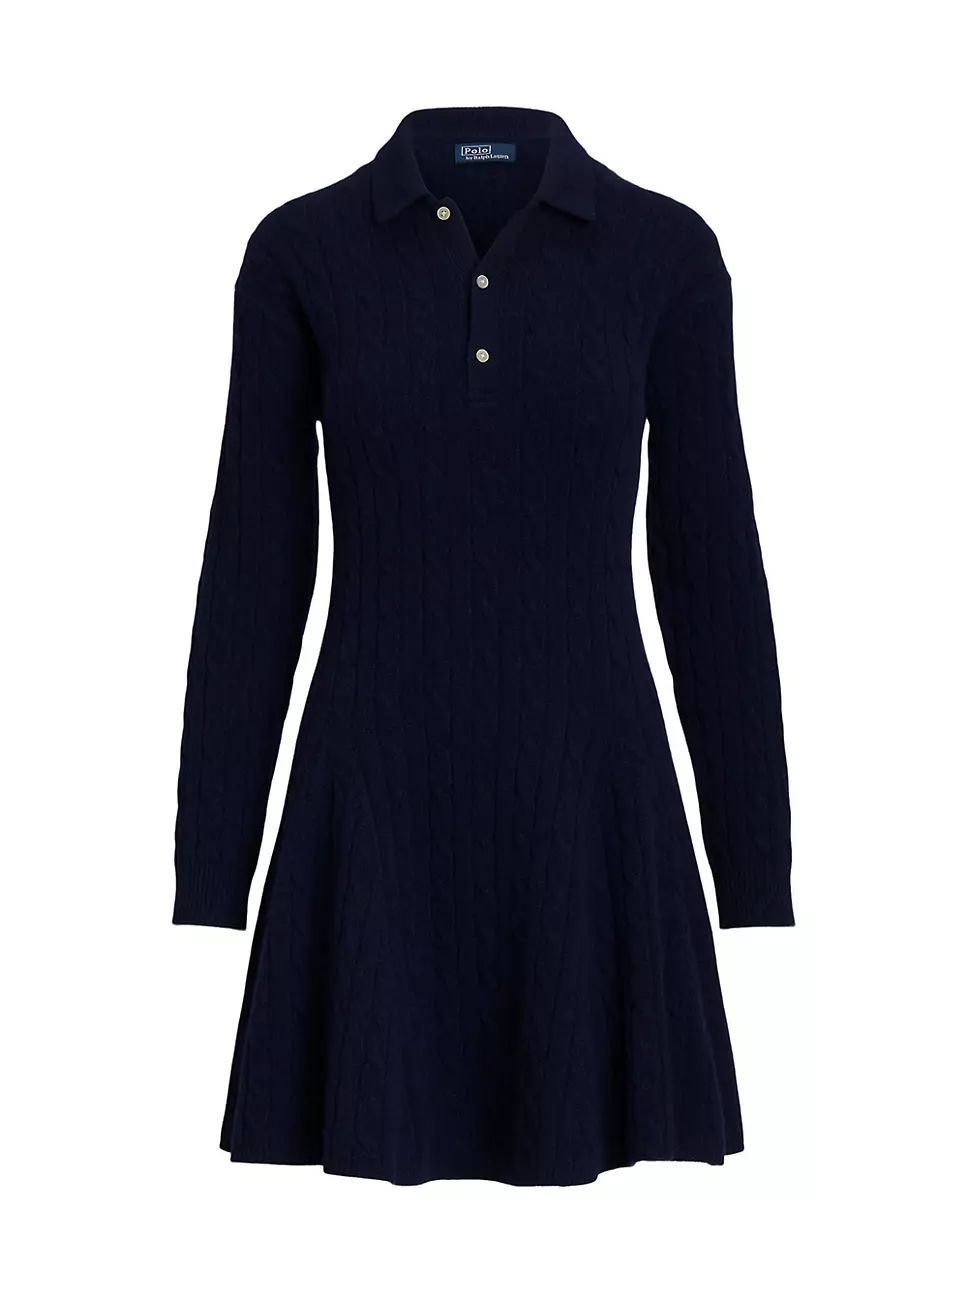 Polo Ralph Lauren Cable-Knit Wool-Cashmere Sweaterdress | Saks Fifth Avenue